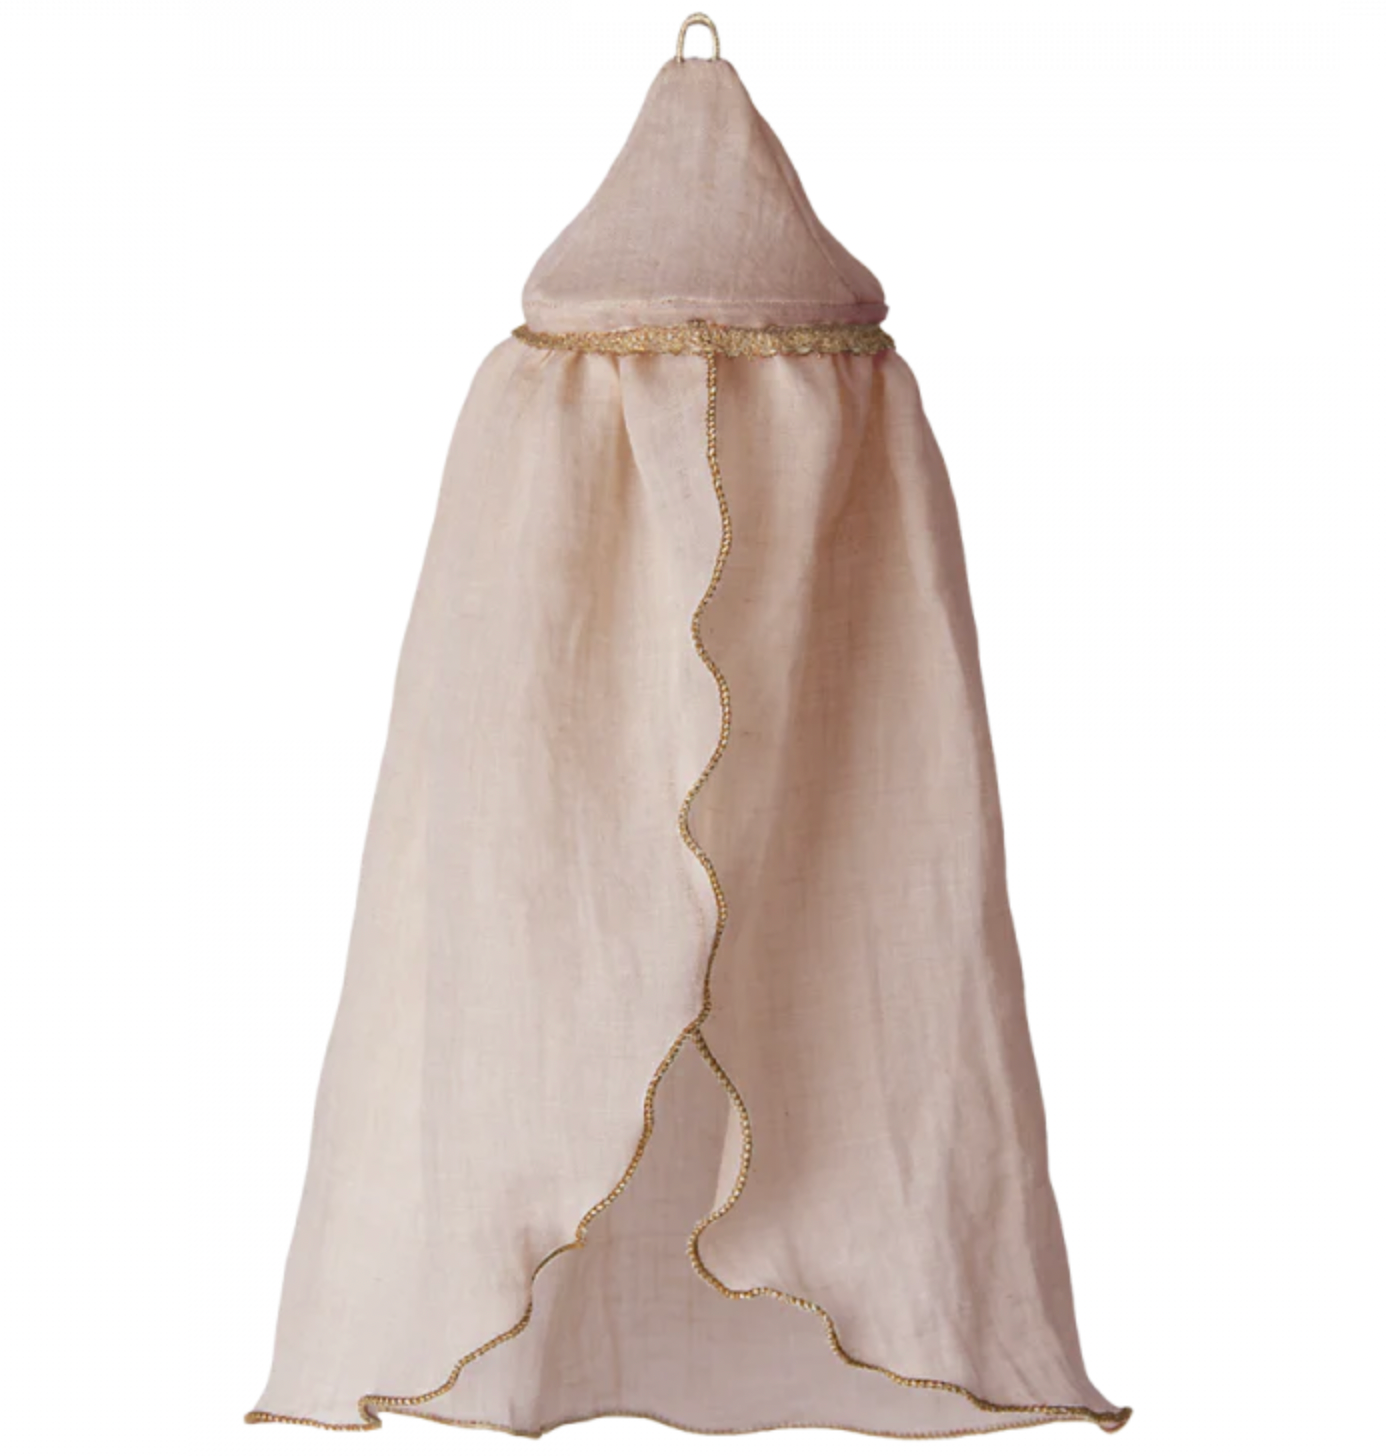 Miniature Bed Canopy